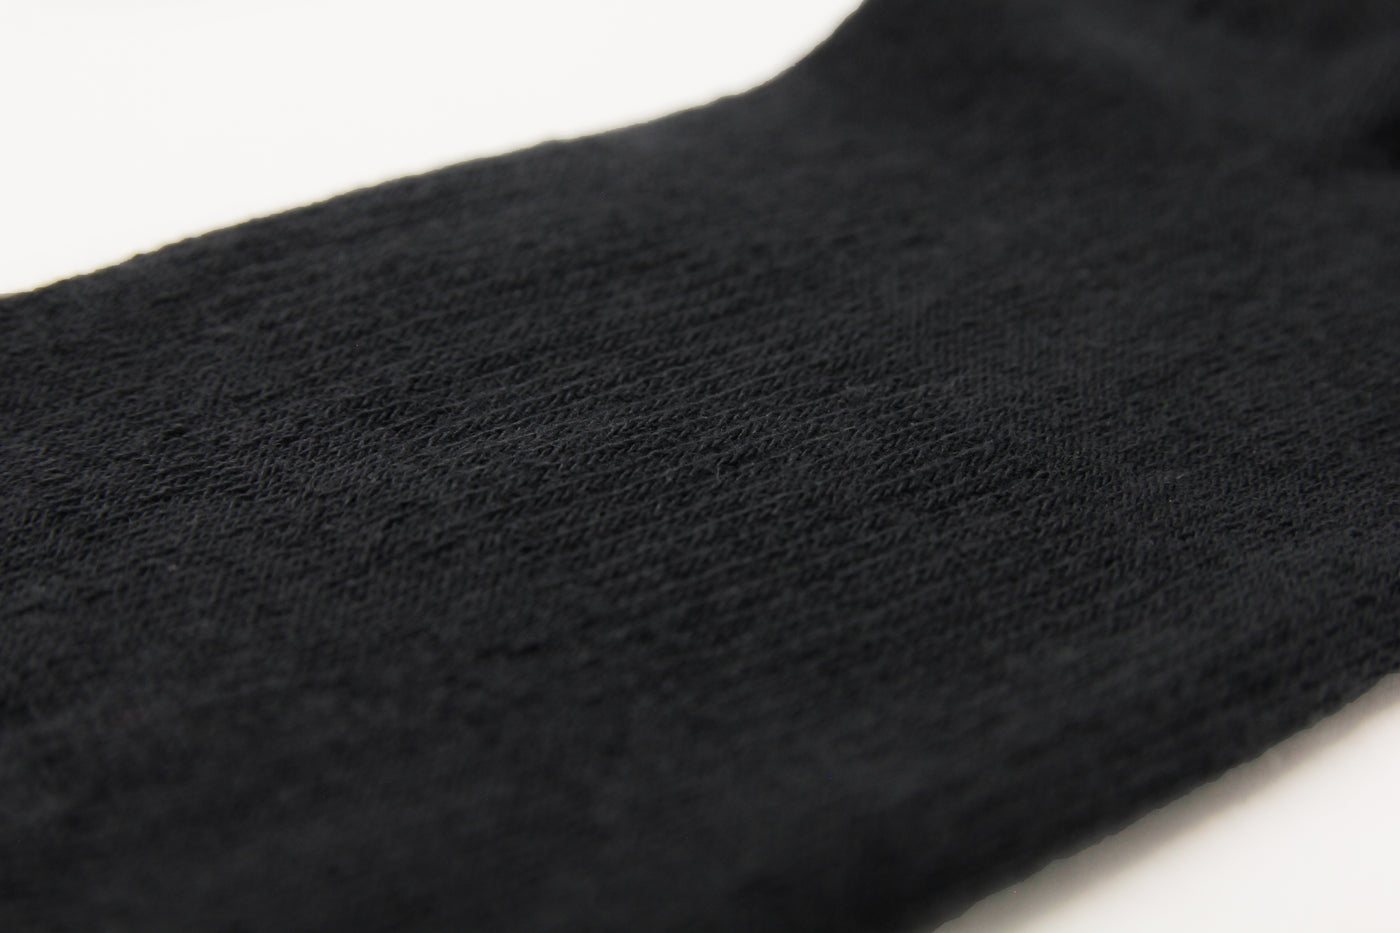 Sustainable socks with arch support. Sport socks for running